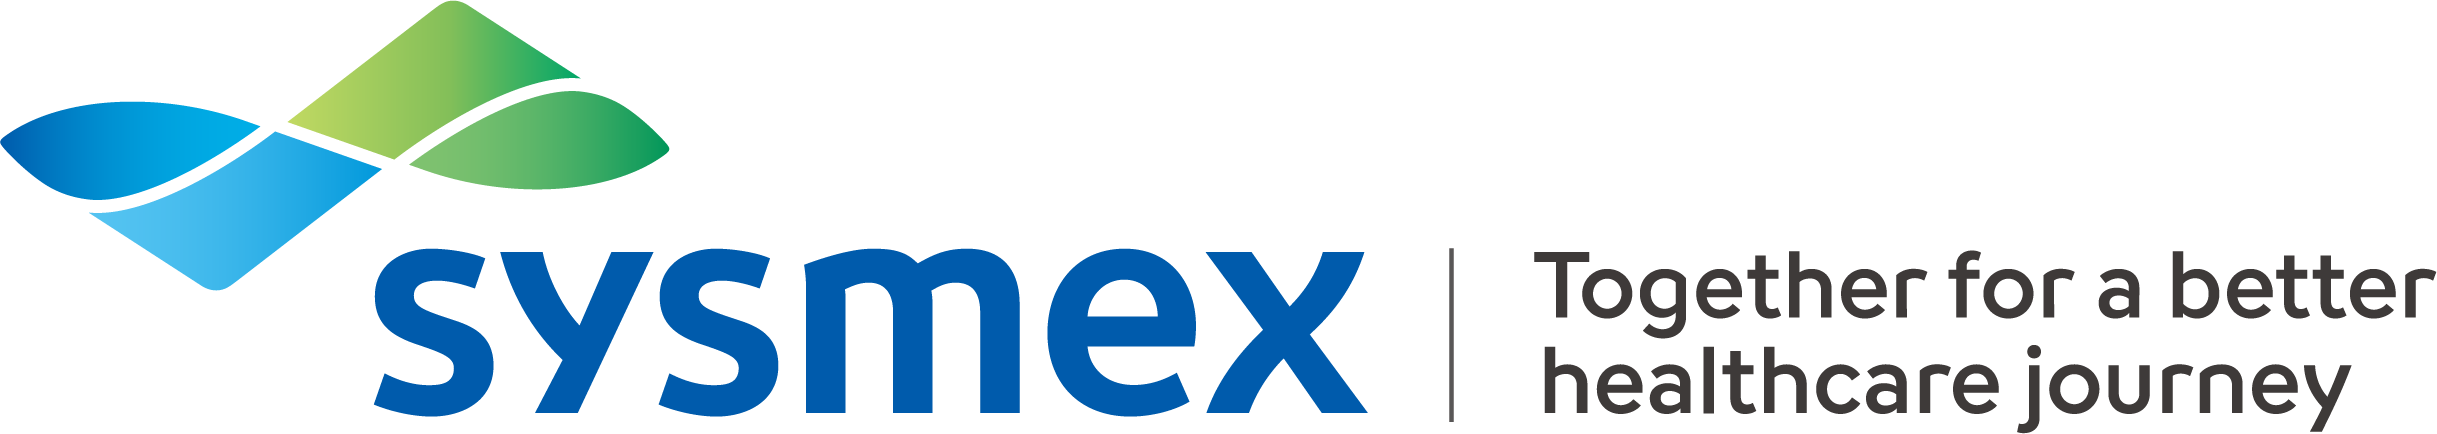 Center for Learning Sysmex America logo, link to start page